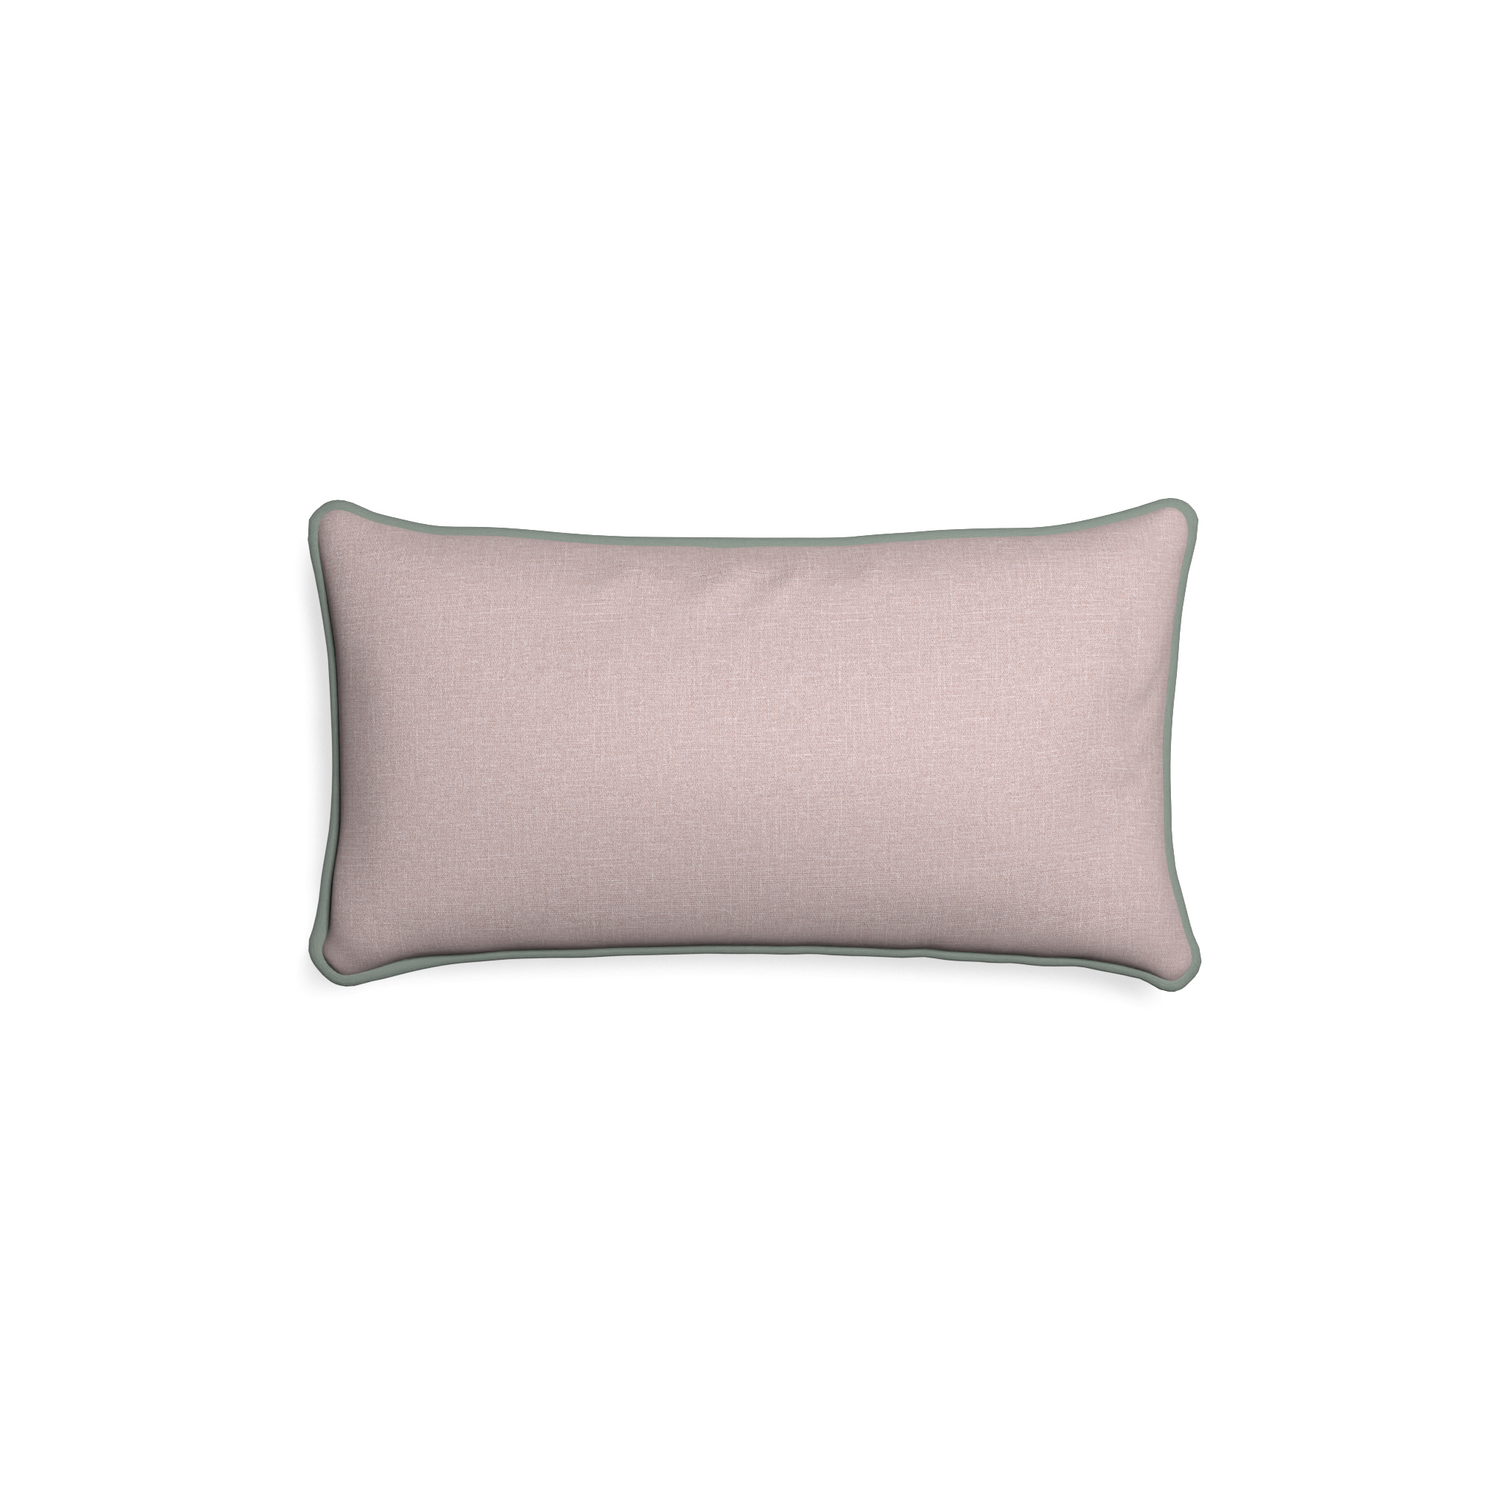 Petite-lumbar orchid custom mauve pinkpillow with sage piping on white background